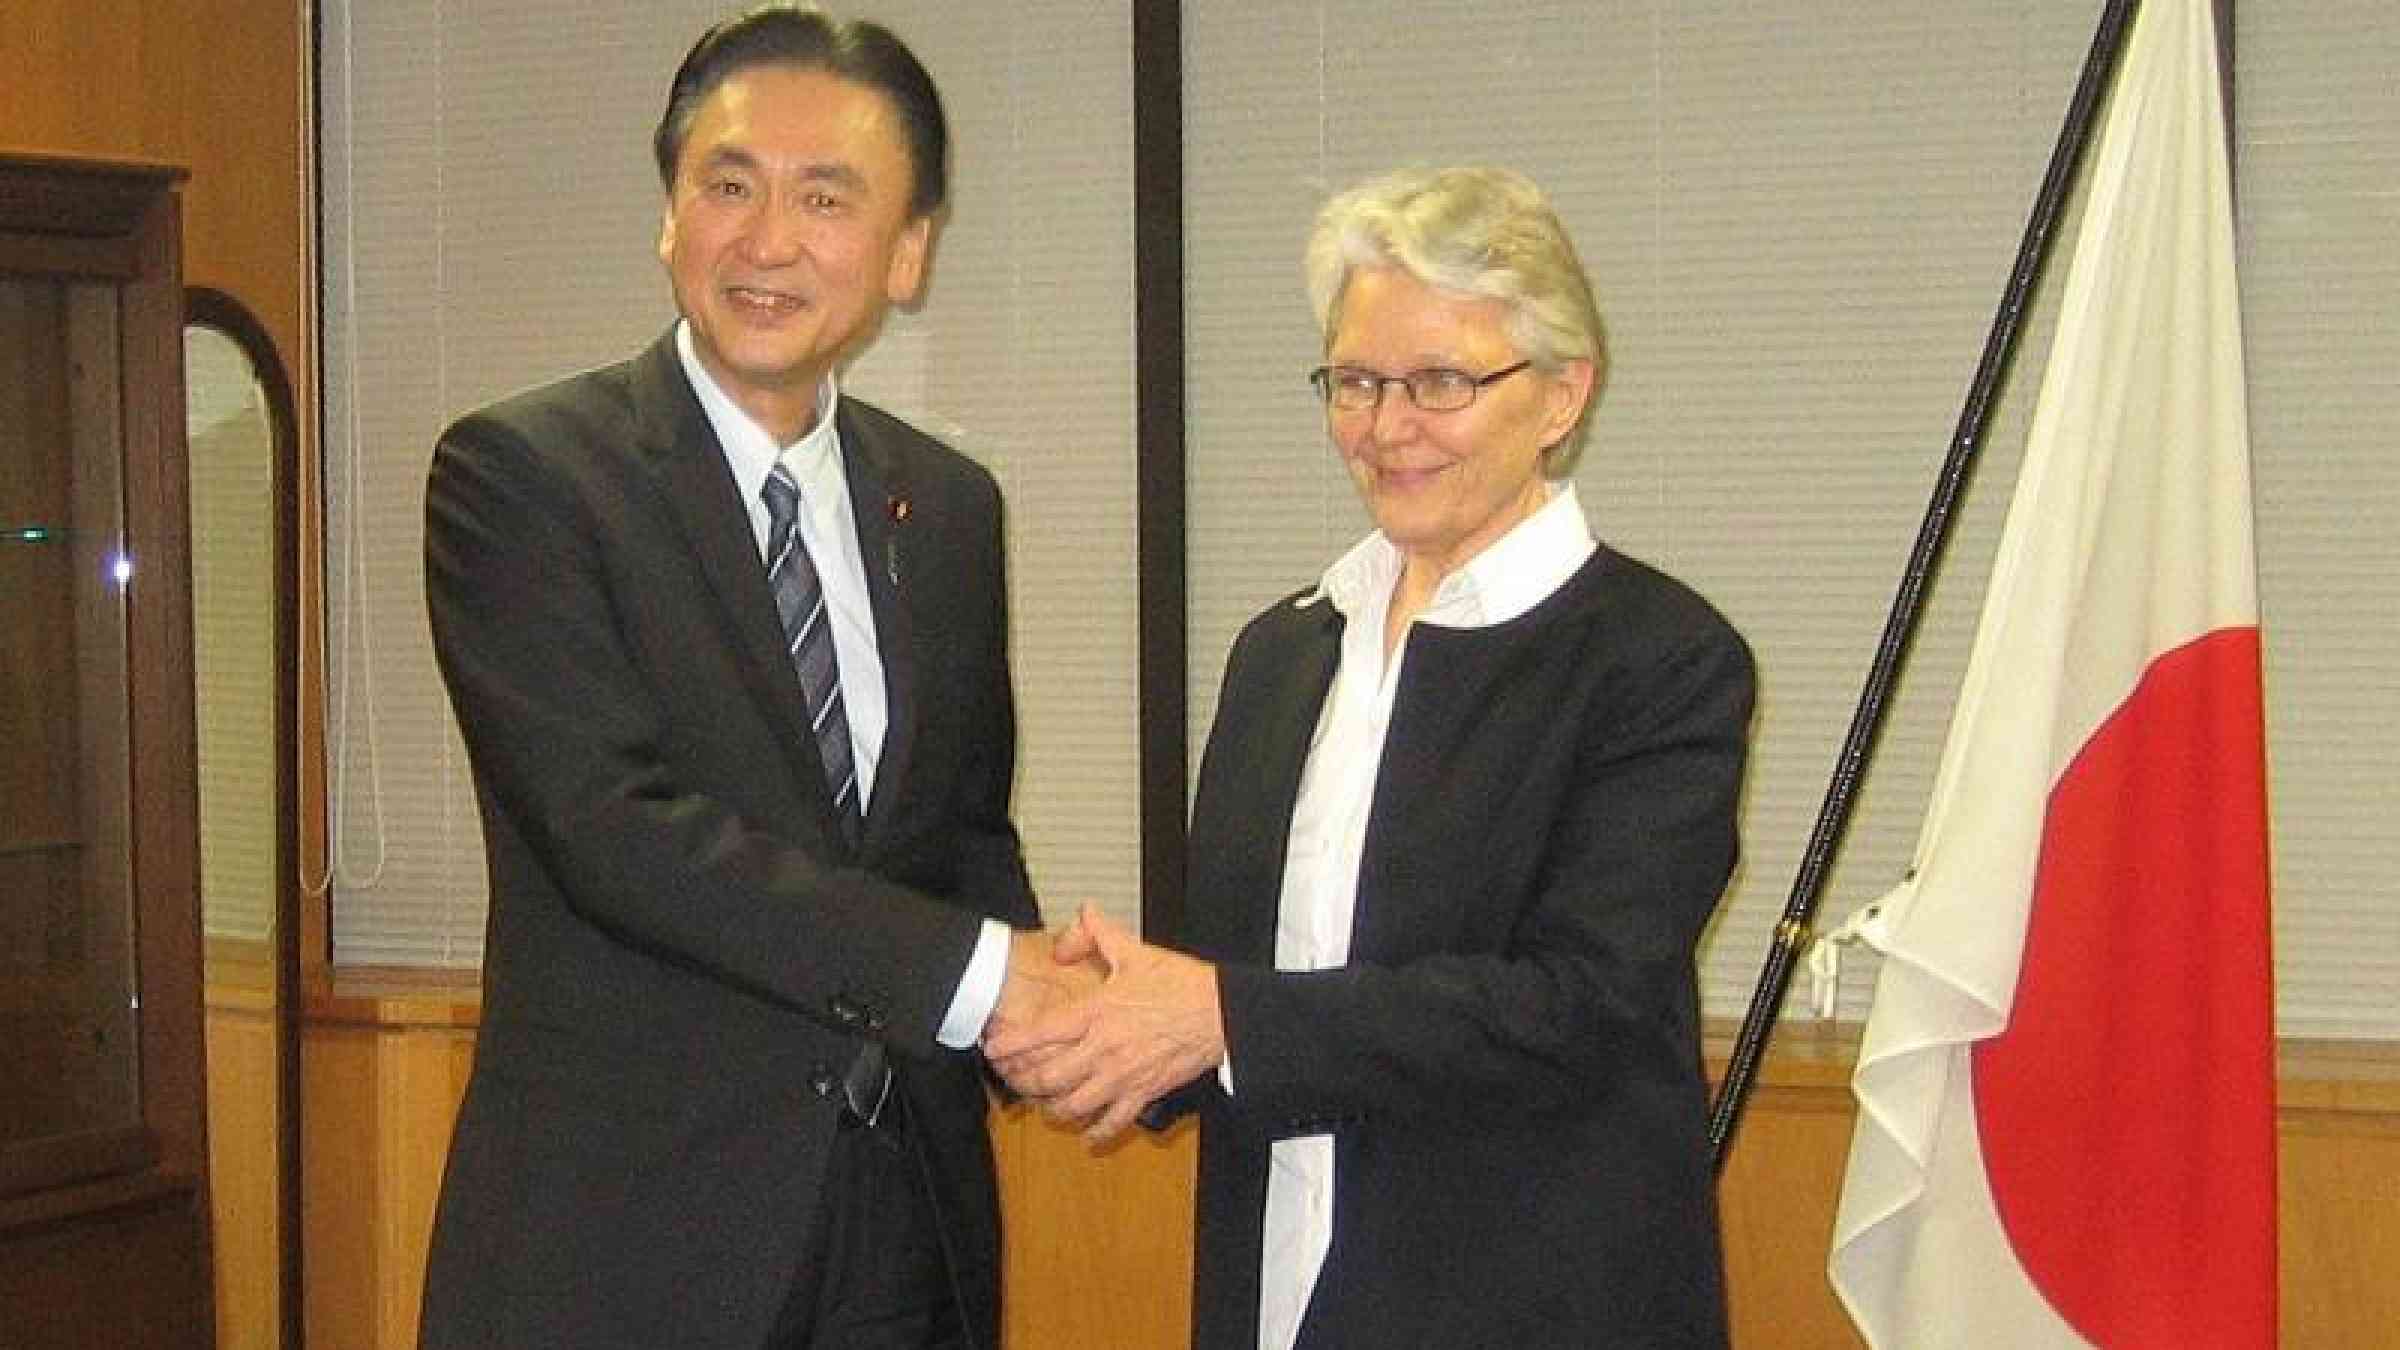 UNISDR Chief Margareta Wahlstrom is pictured here with Japan's first ever Minister for Building National Resilience, Keiji Furuya, who is also Minister for Disaster Management.